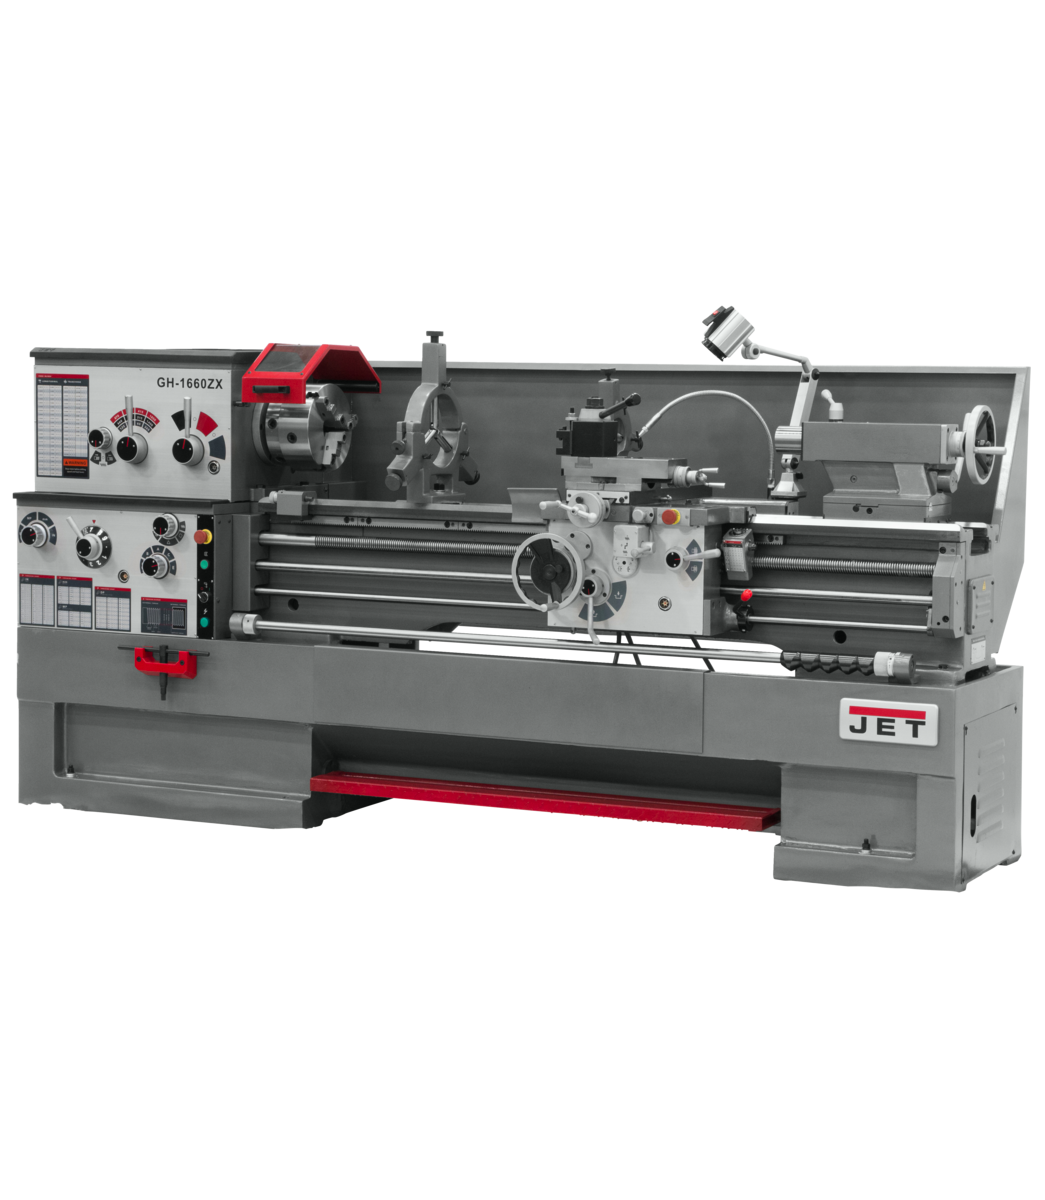 321484, GH-1860ZX Lathe with 2-axis ACU-RITE DRO 203 Installed, Jet, Metalworking, Turning, Lathes